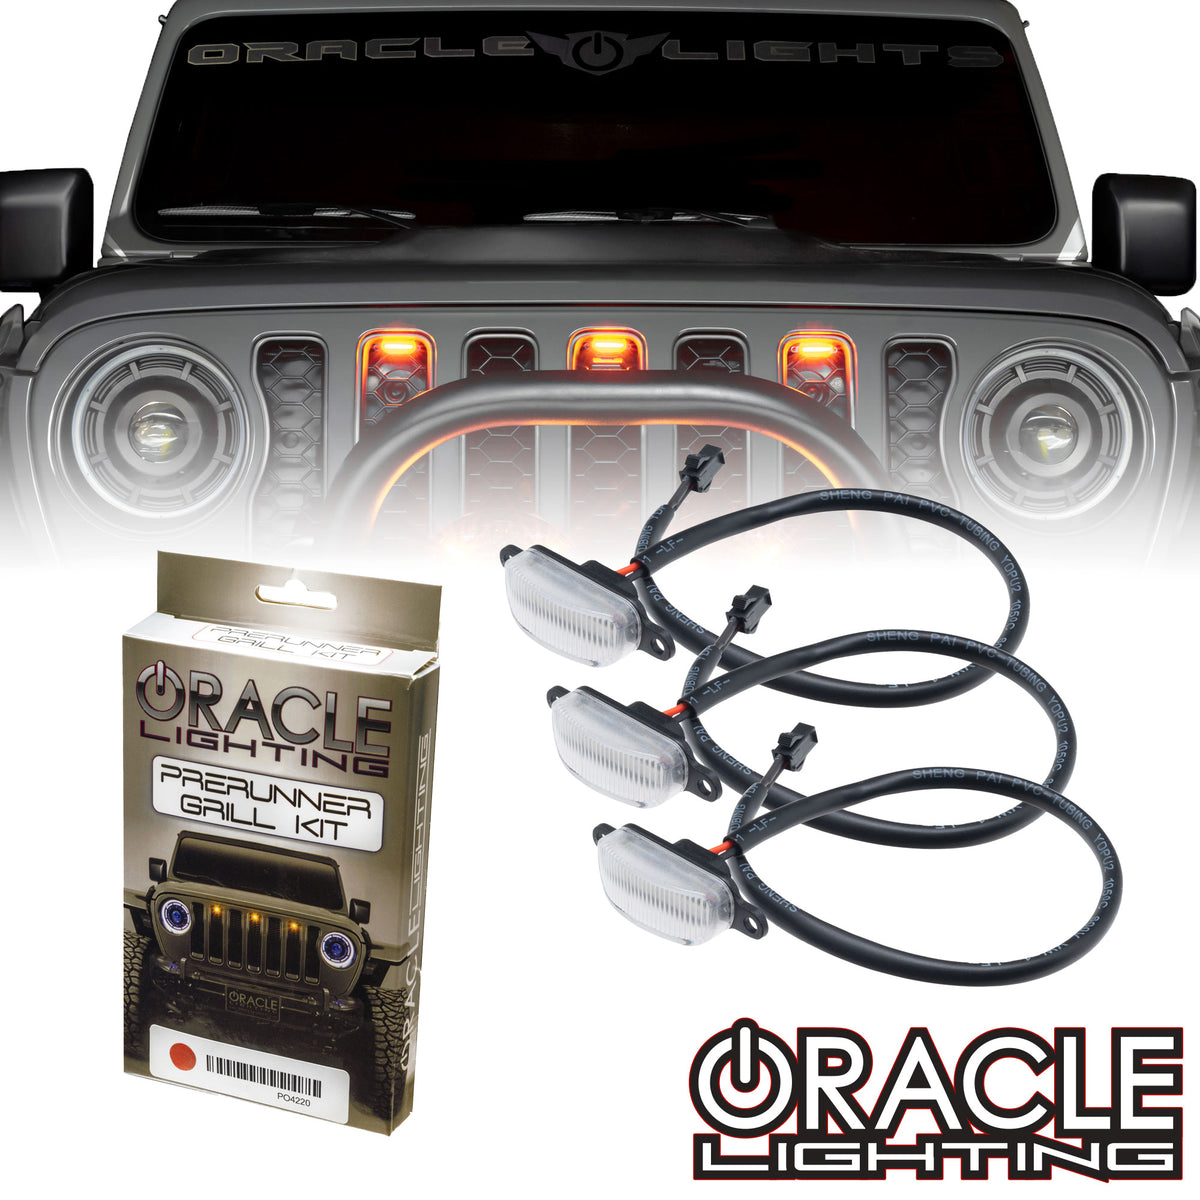 the Oracle™ Touch